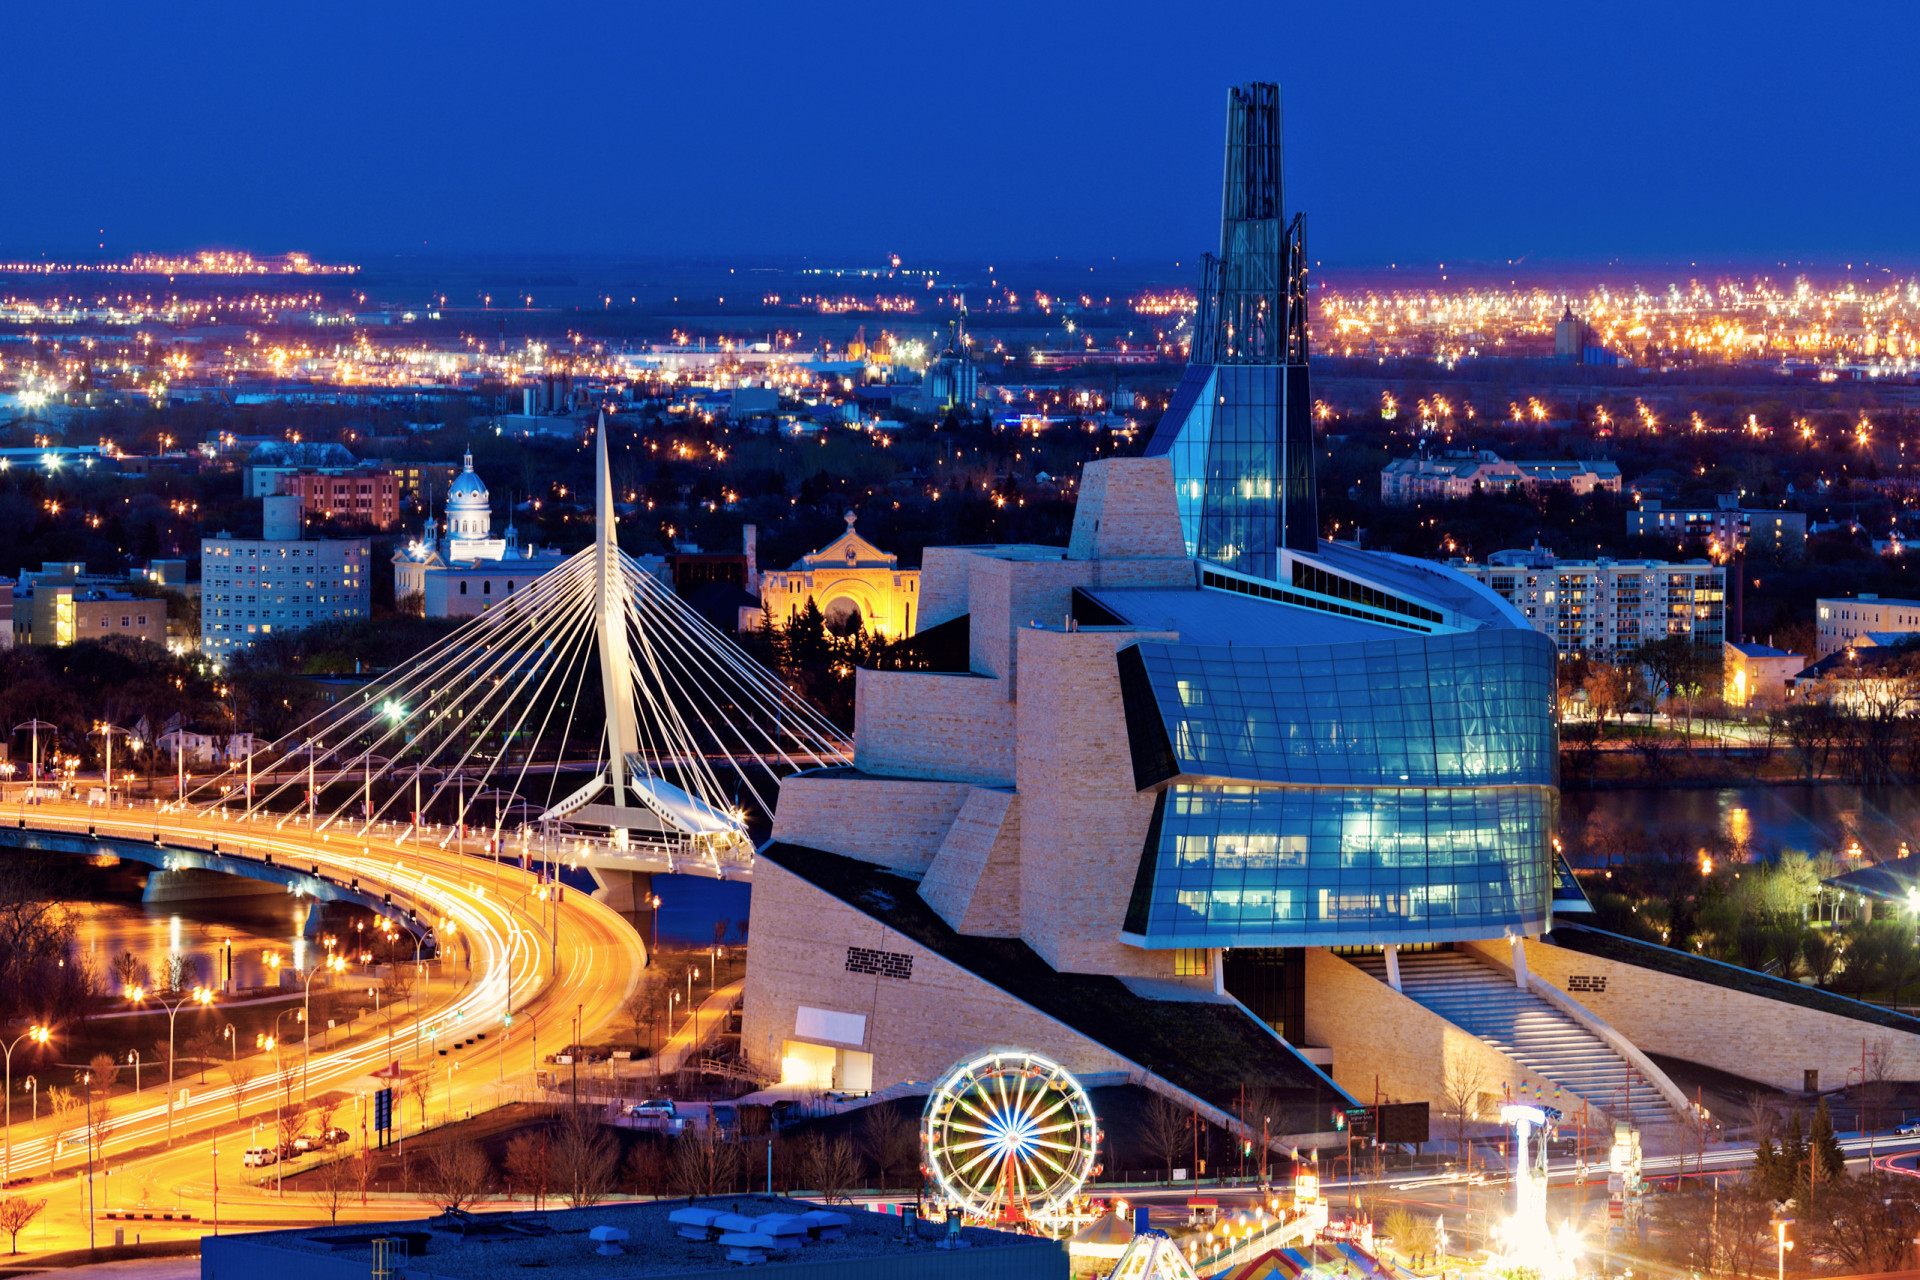 Winnipeg is known as a big city with a small-town feel, and two sights you should definitely see are Assiniboine Park and the Canadian Museum for Human Rights. <p>You may also like:<a href="https://www.starsinsider.com/n/389995?utm_source=msn.com&utm_medium=display&utm_campaign=referral_description&utm_content=384585v6en-us"> Demanding actors who changed how movies turned out</a></p>